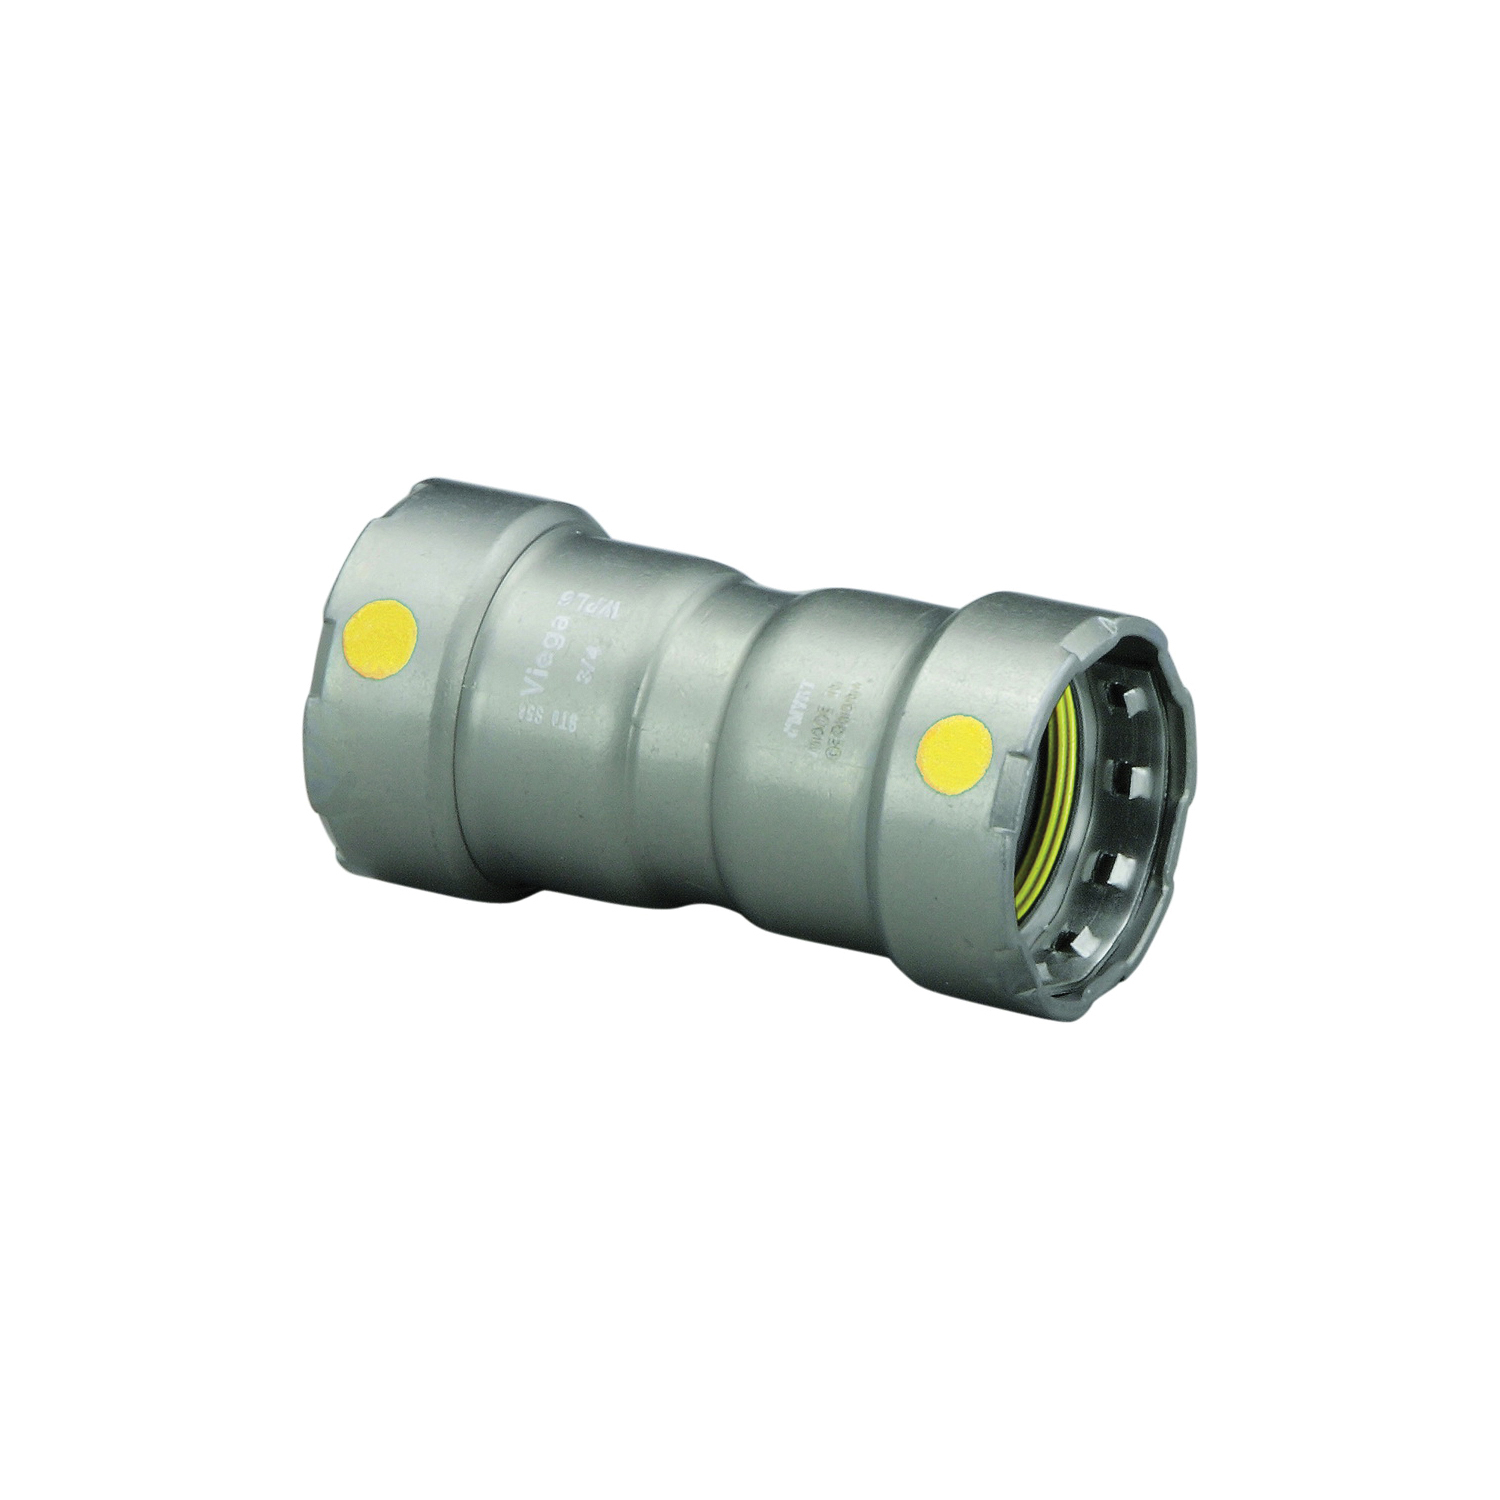 MegaPressG Pipe Coupling with Stop